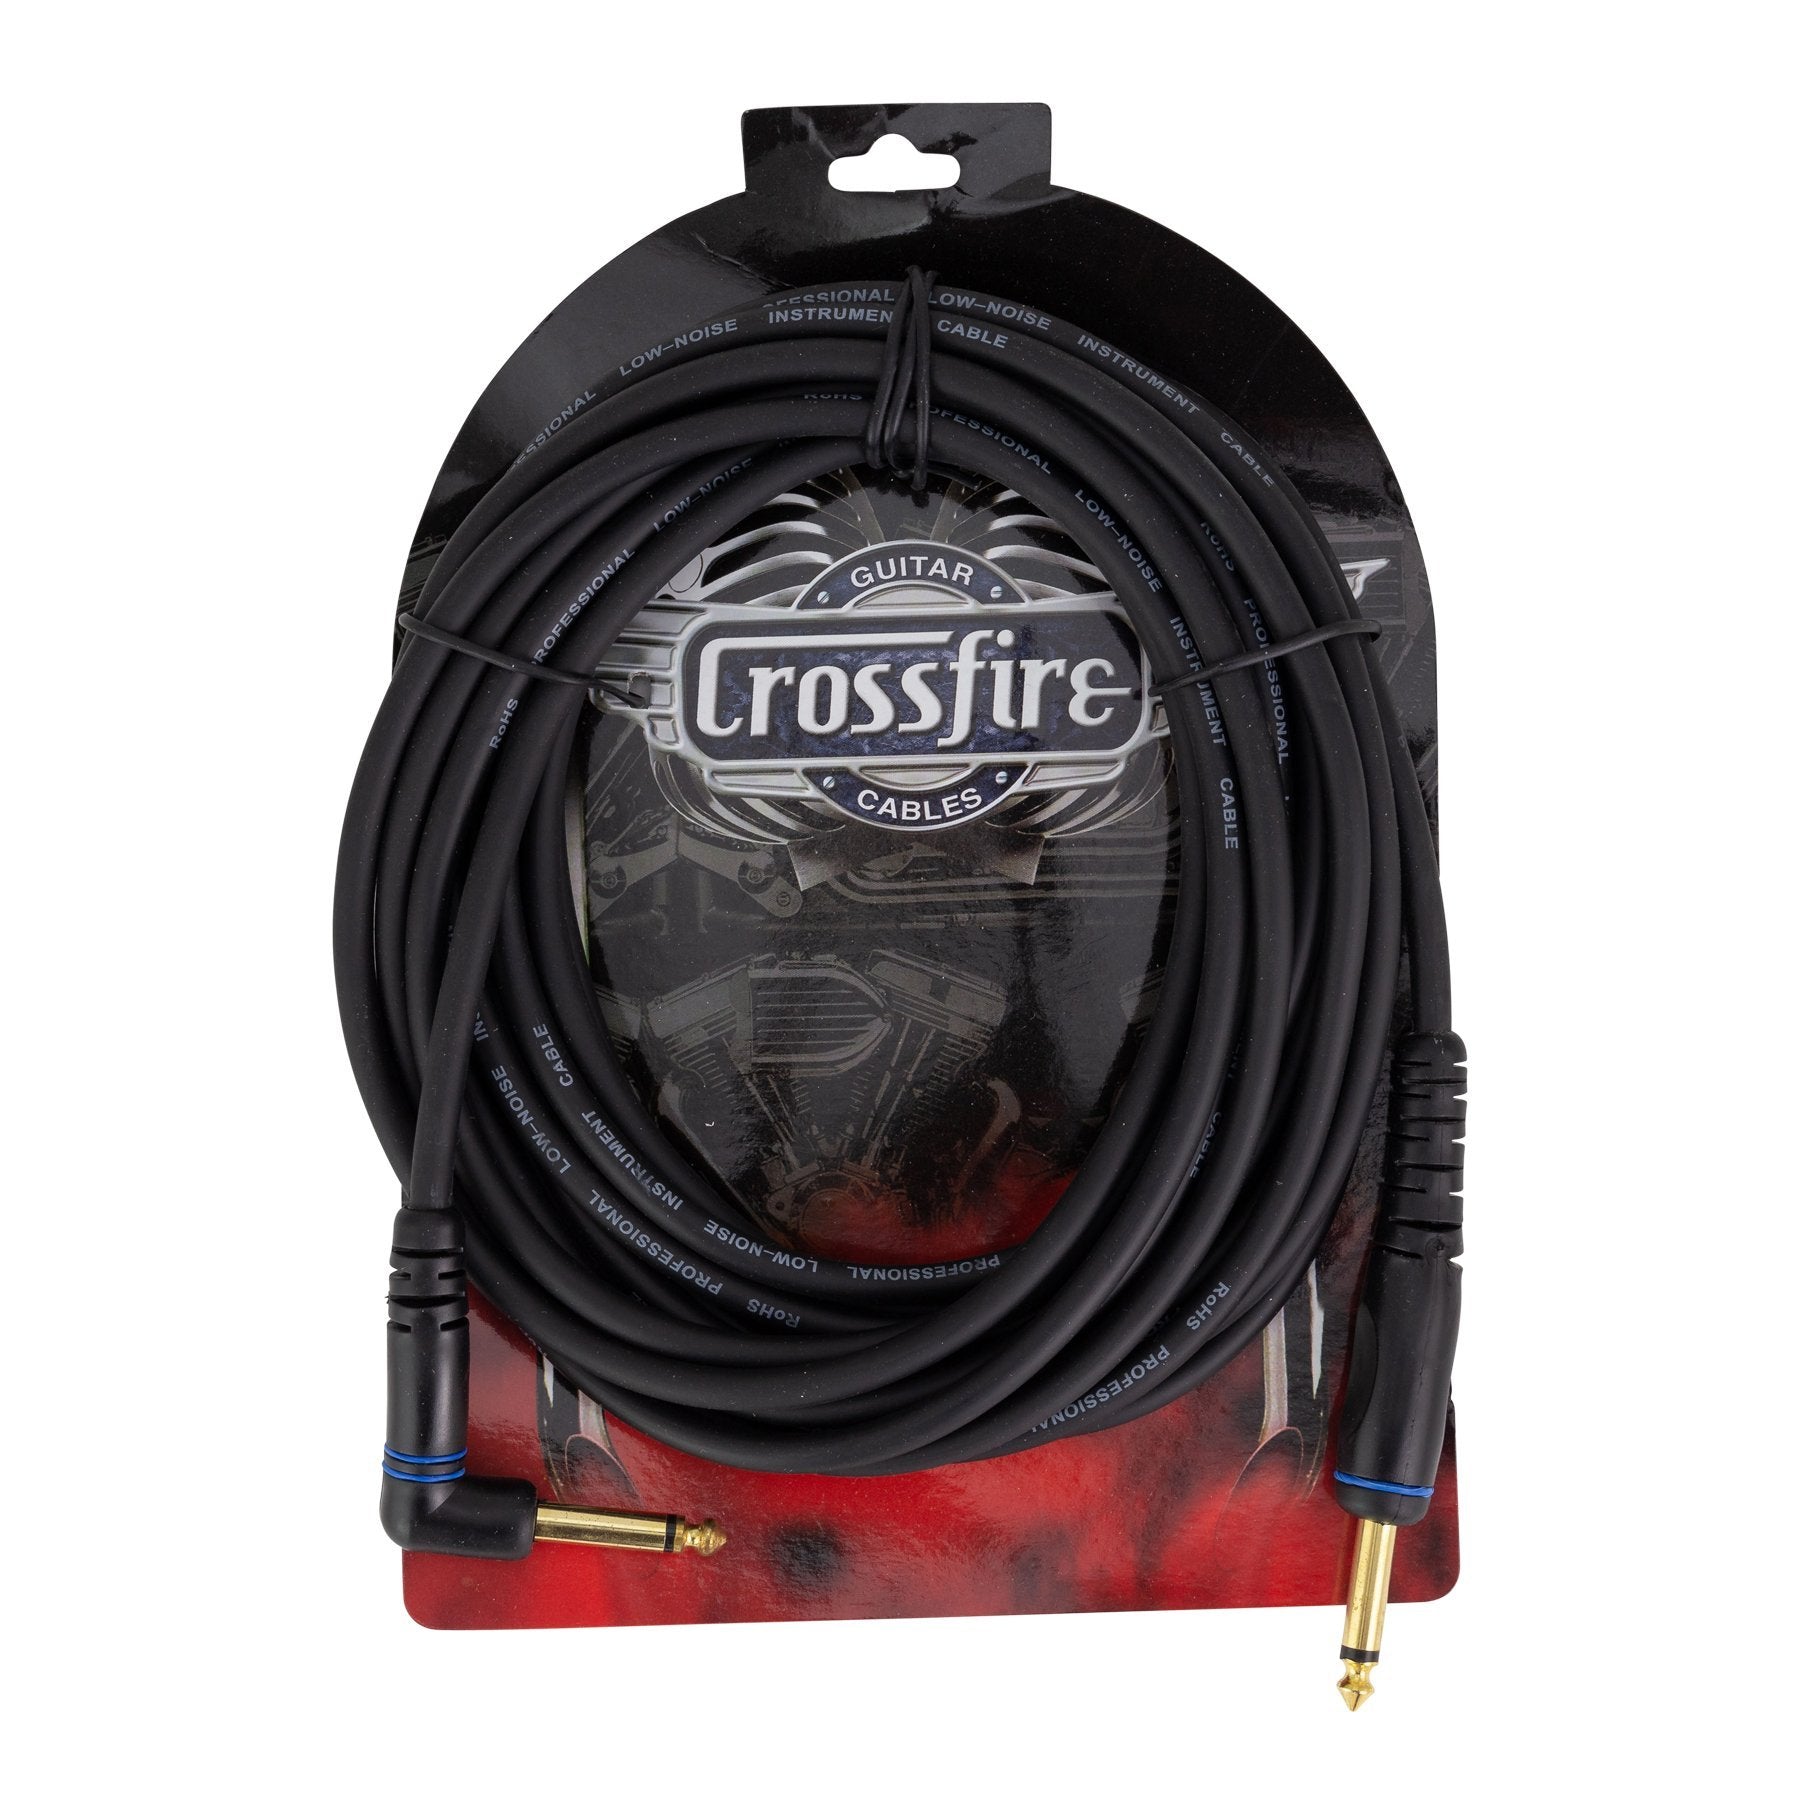 Crosssfire 20' / 6 Metre Instrument Cable with Straight/Angled Moulded Jacks-CGC-PP2-20L